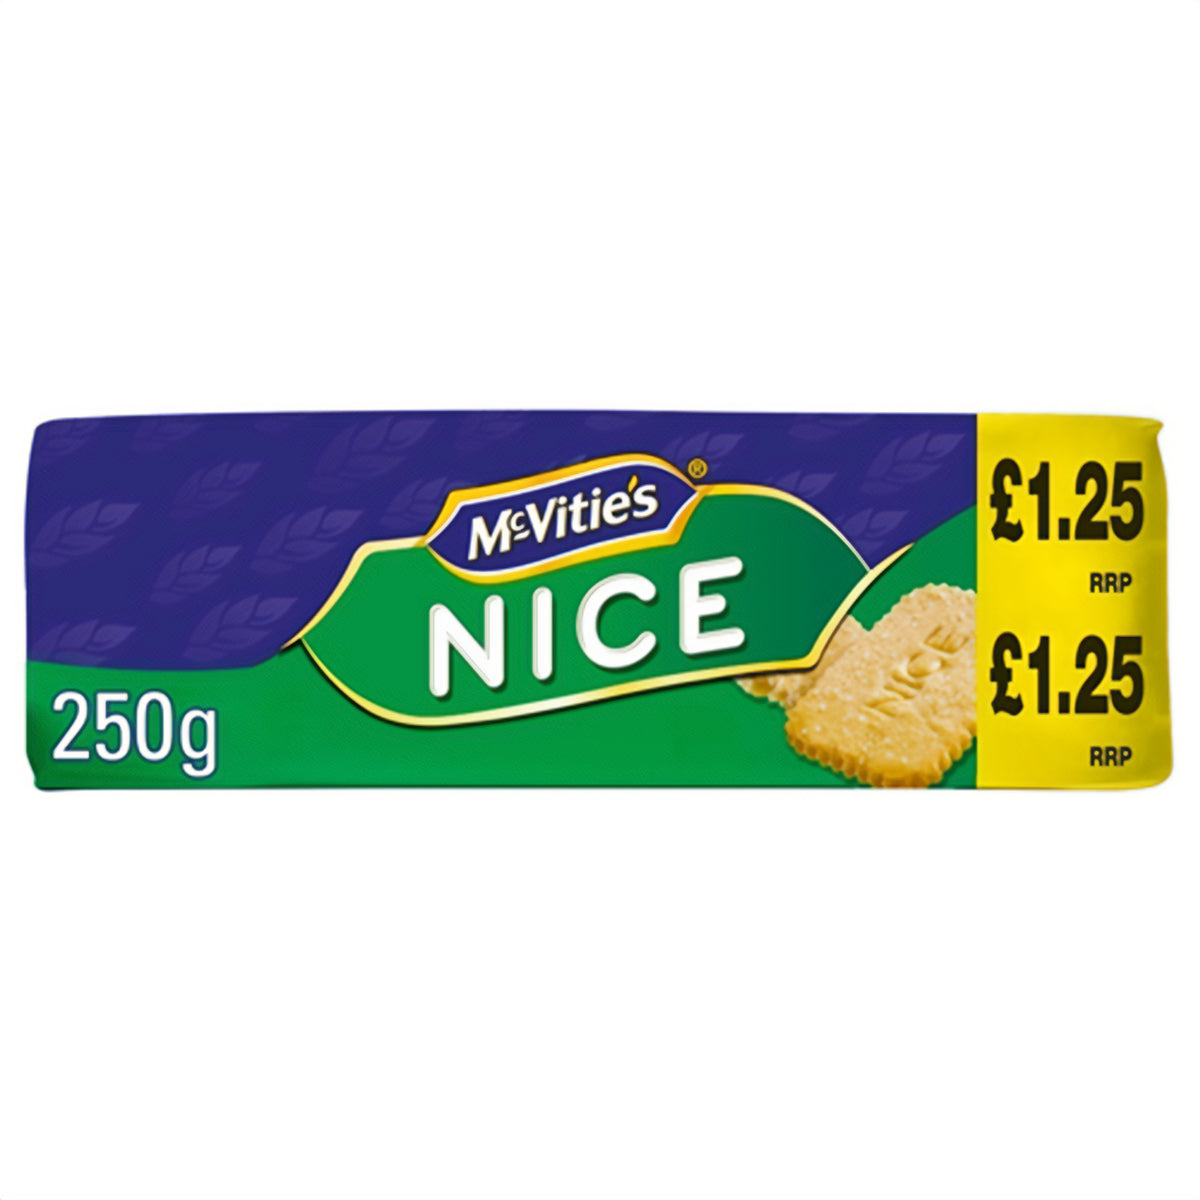 A package of McVities - Nice - 250g biscuits on a white background.